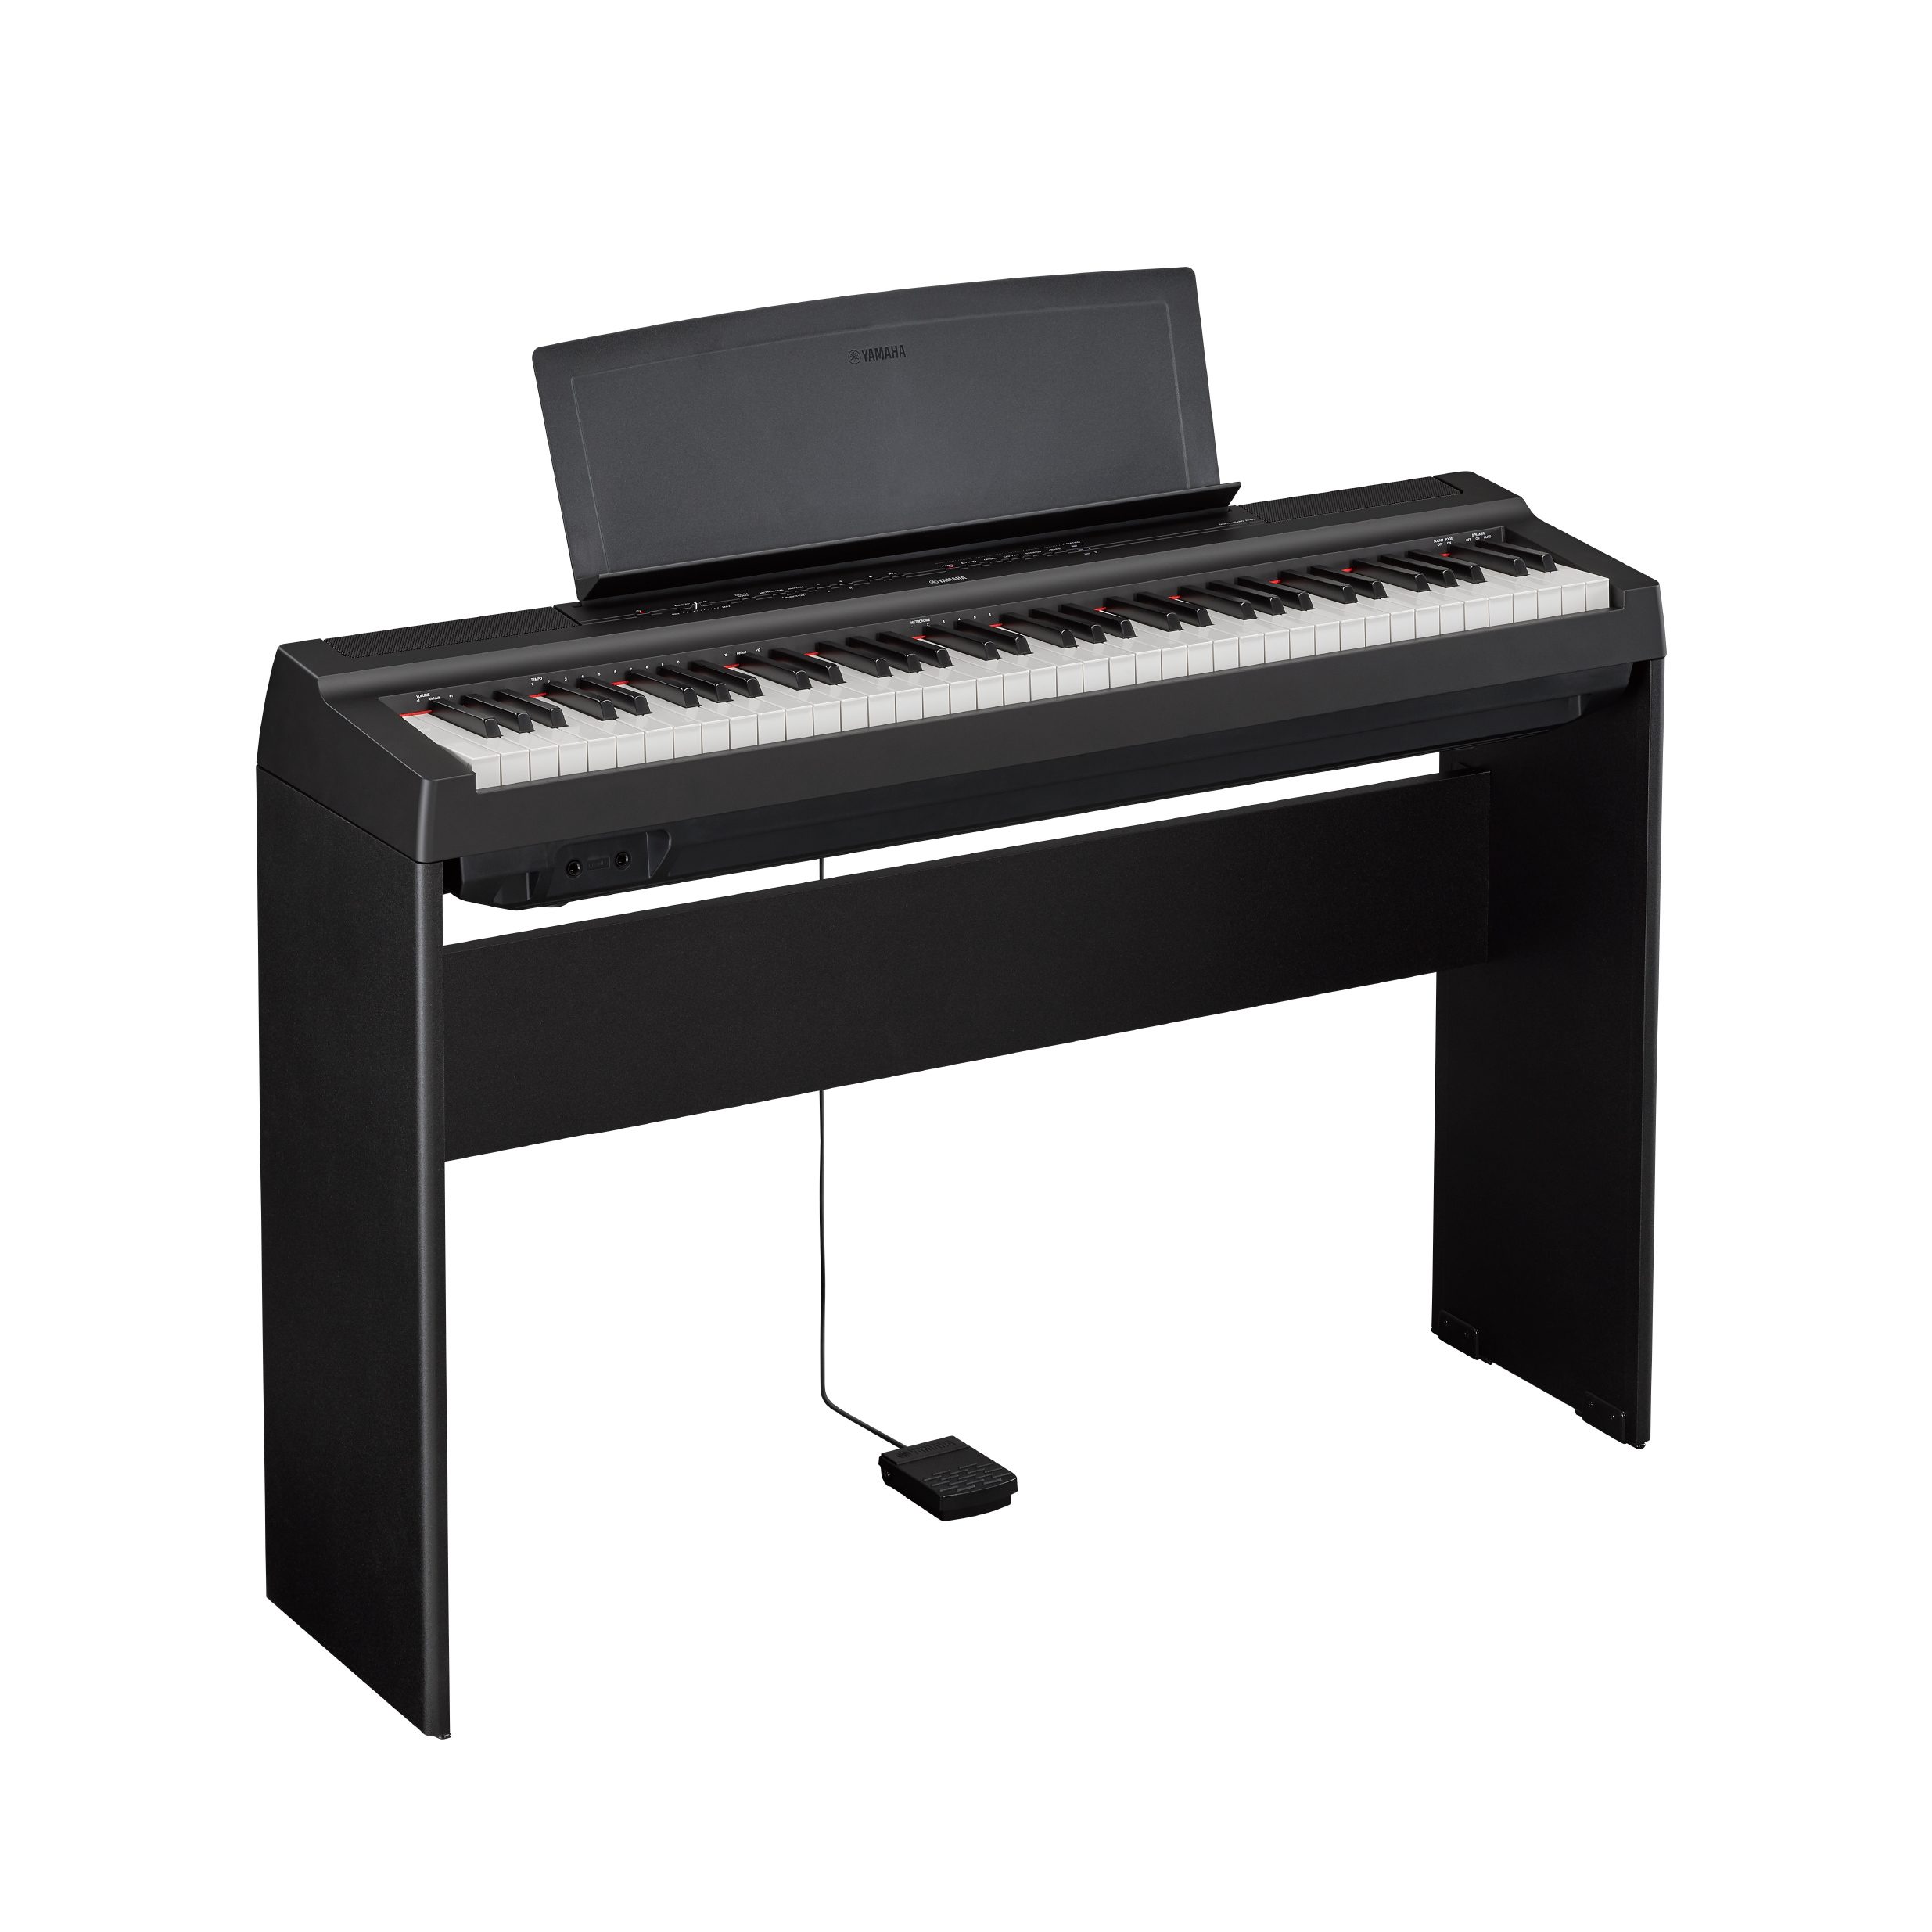 P-121 - Overview - P Series - Pianos - Musical Instruments 